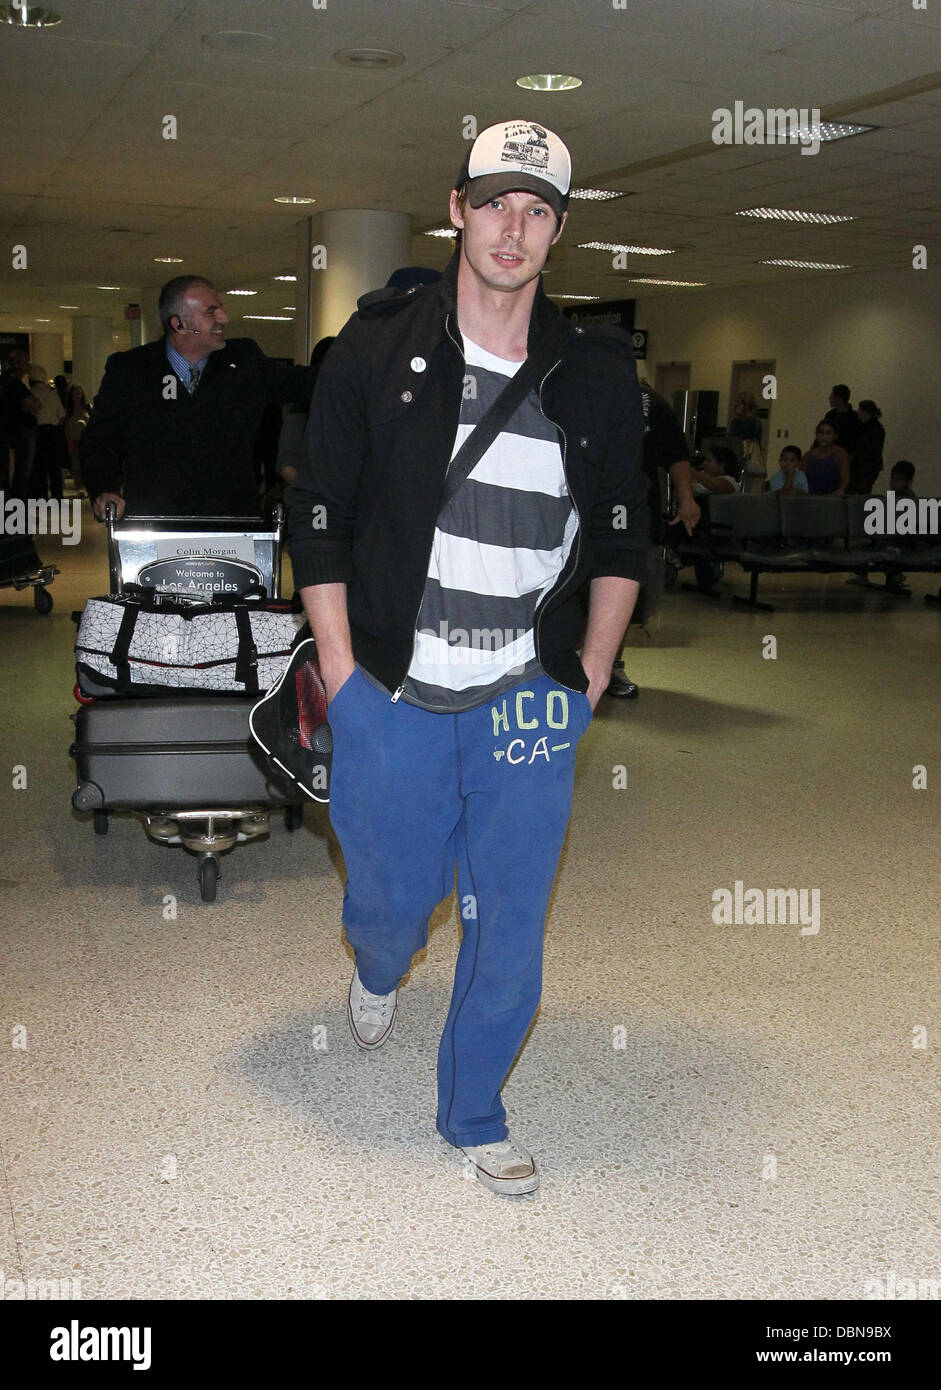 Bradley James The stars of international smash hit BBC television show 'Merlin' arrive at LAX on a flight from London Heathrow which was delayed over 4 hours from its scheduled arrival time. Los Angeles, California - 24.07.11 Stock Photo